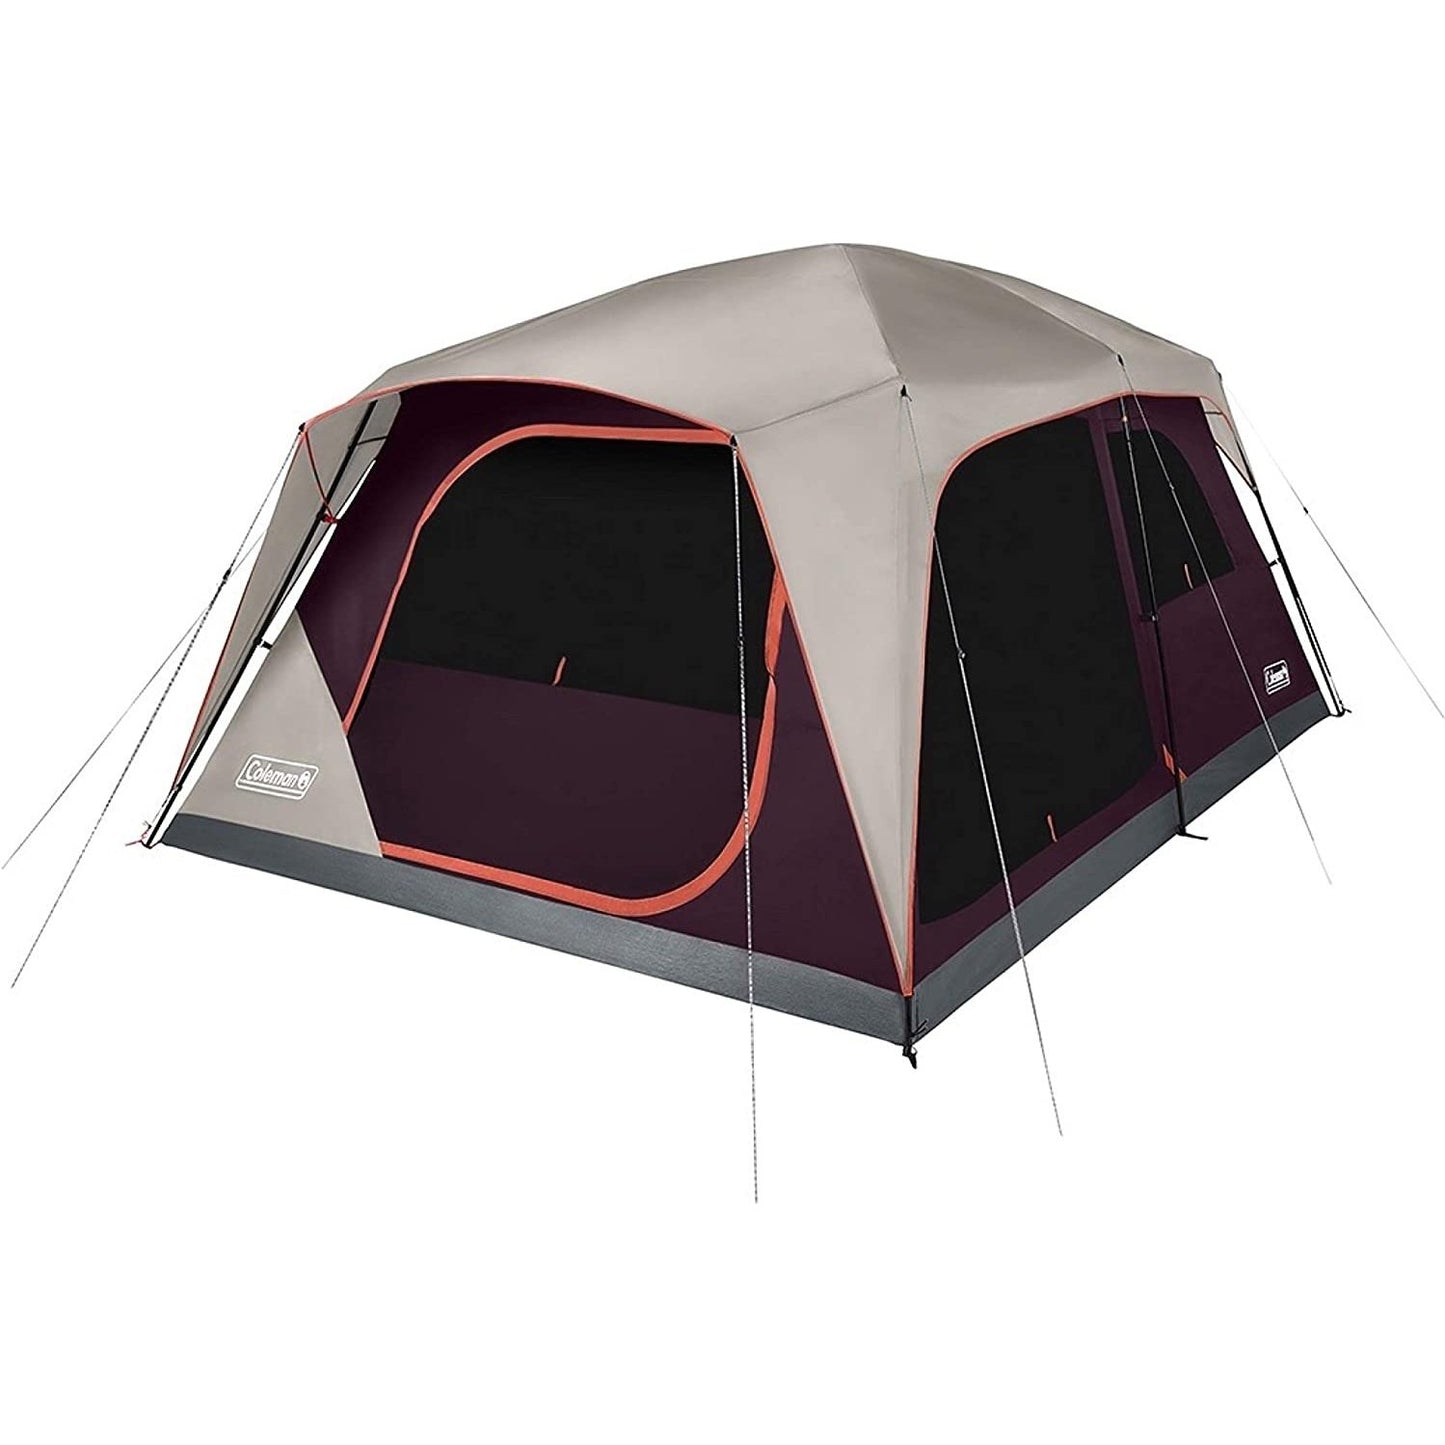 Skylodge 12-Person Camping Tent, Blackberry